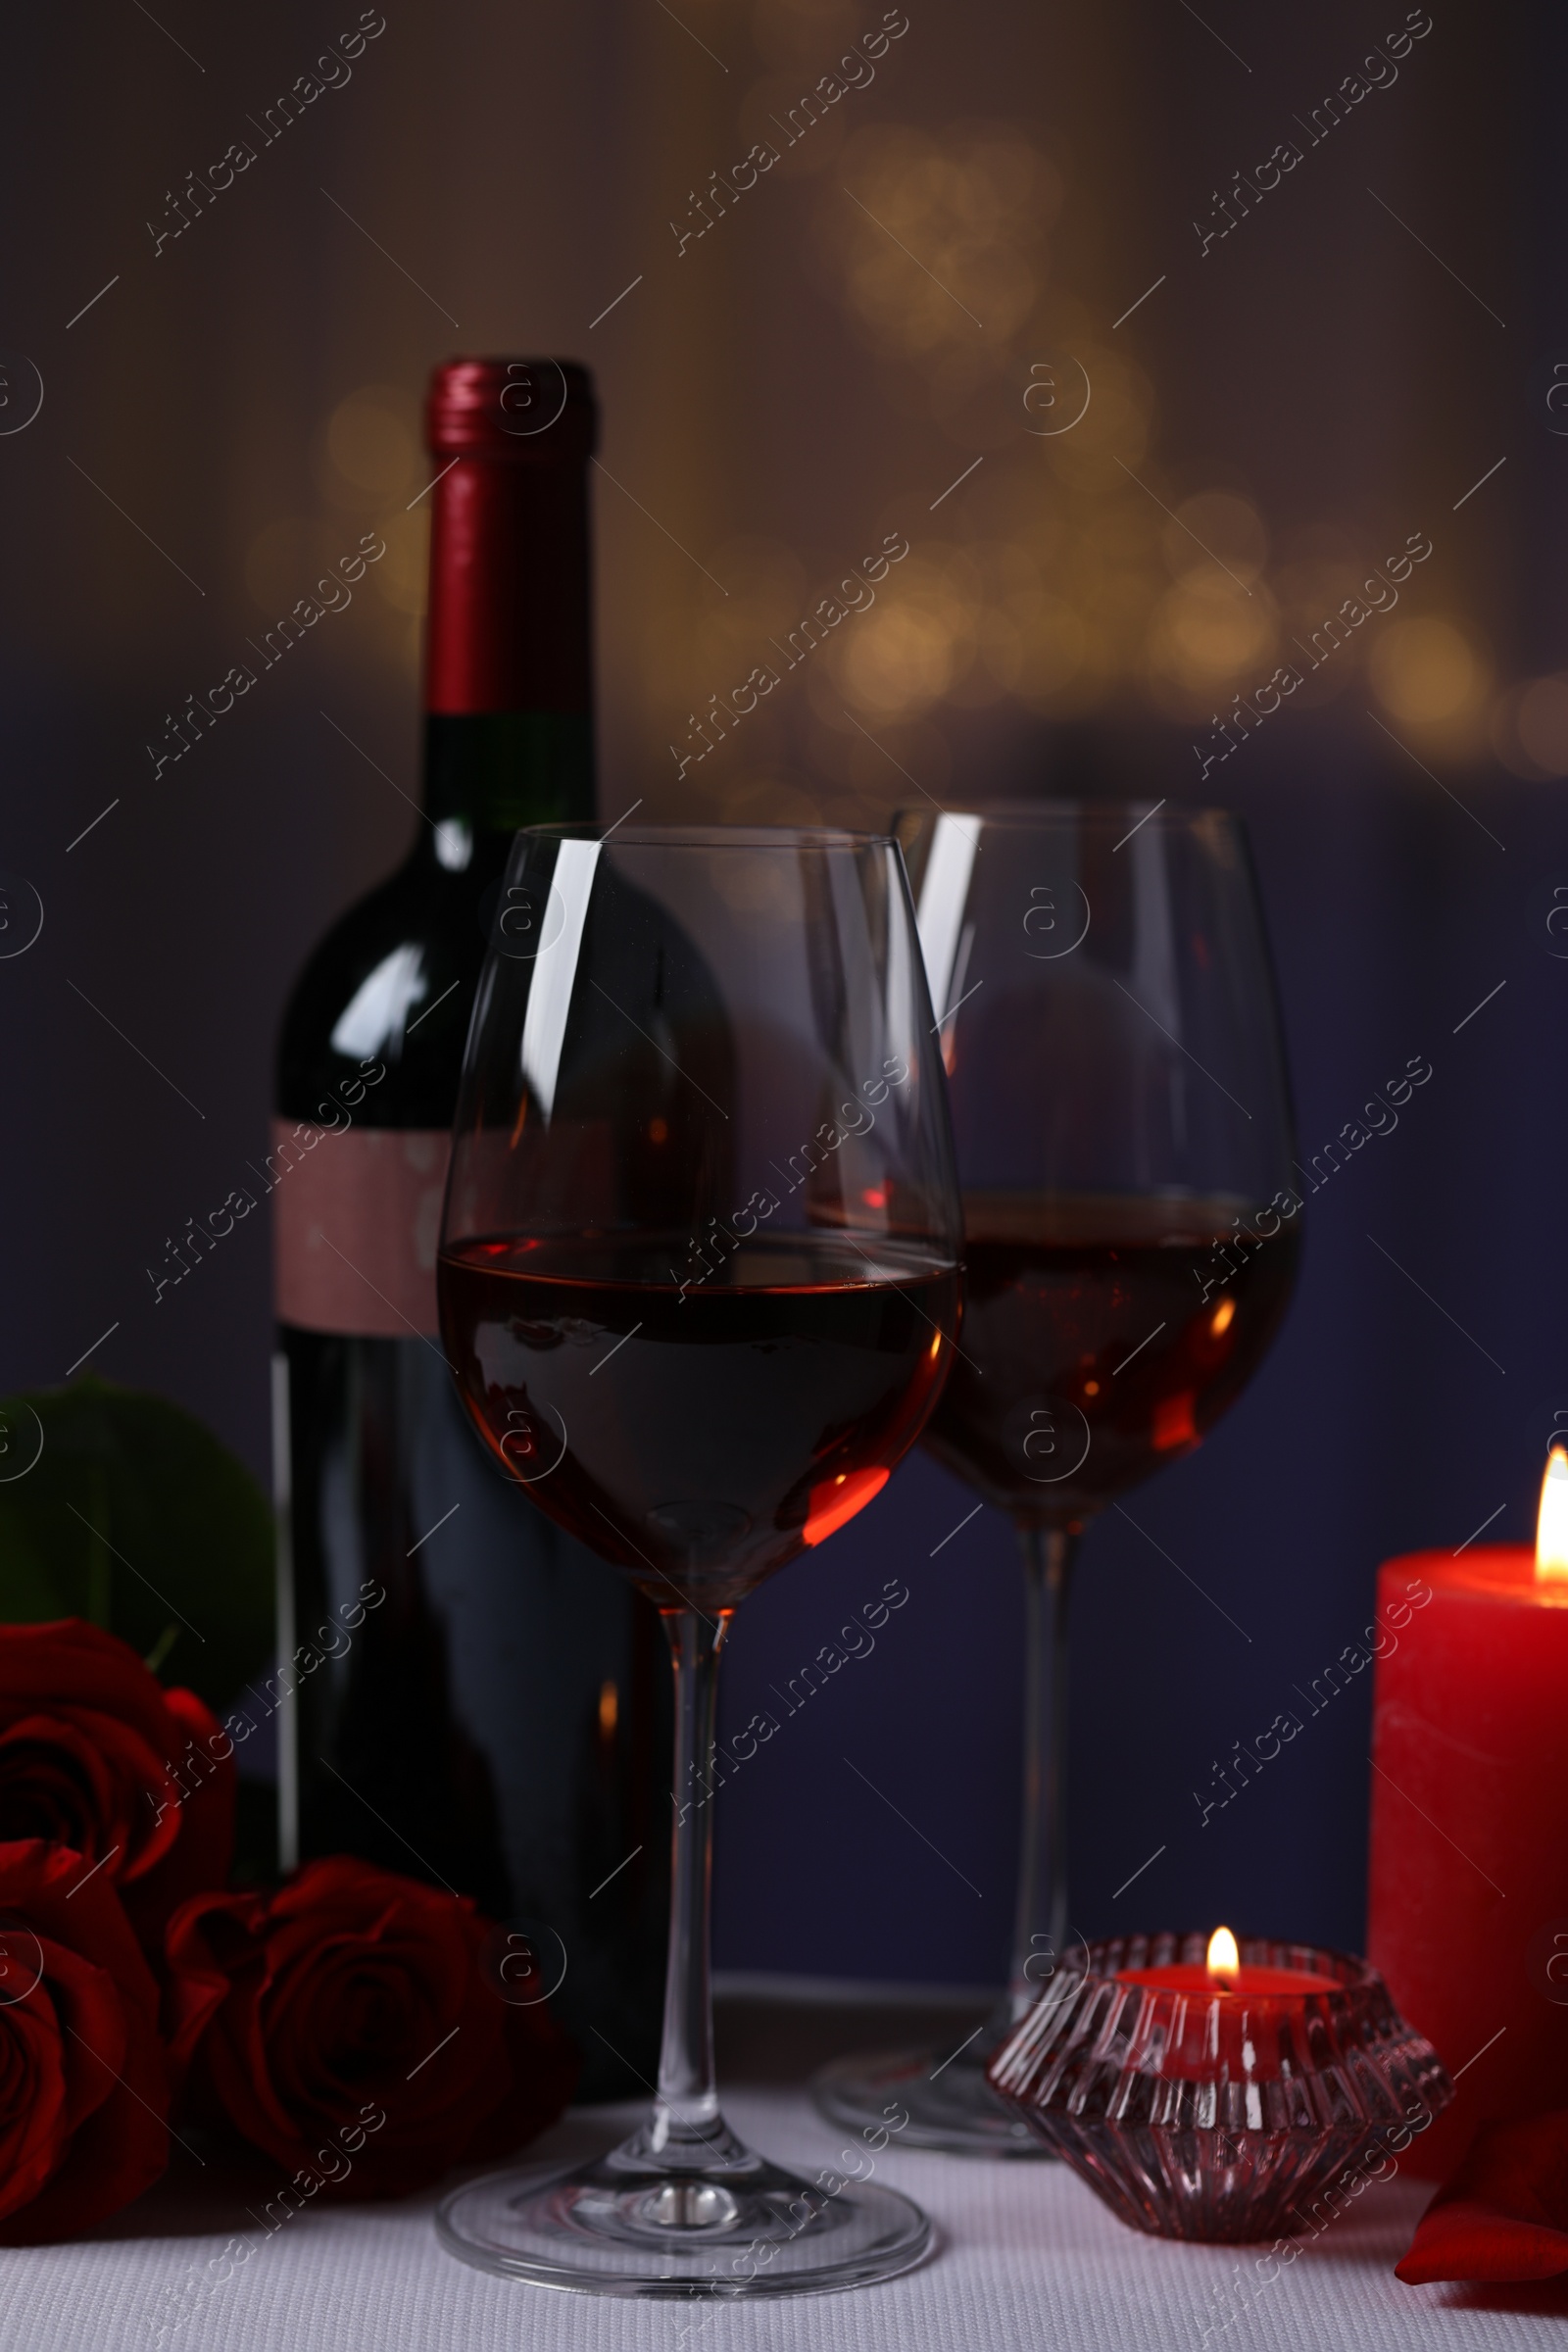 Photo of Glasses of red wine, rose flowers and burning candles on grey table against blurred lights. Romantic atmosphere